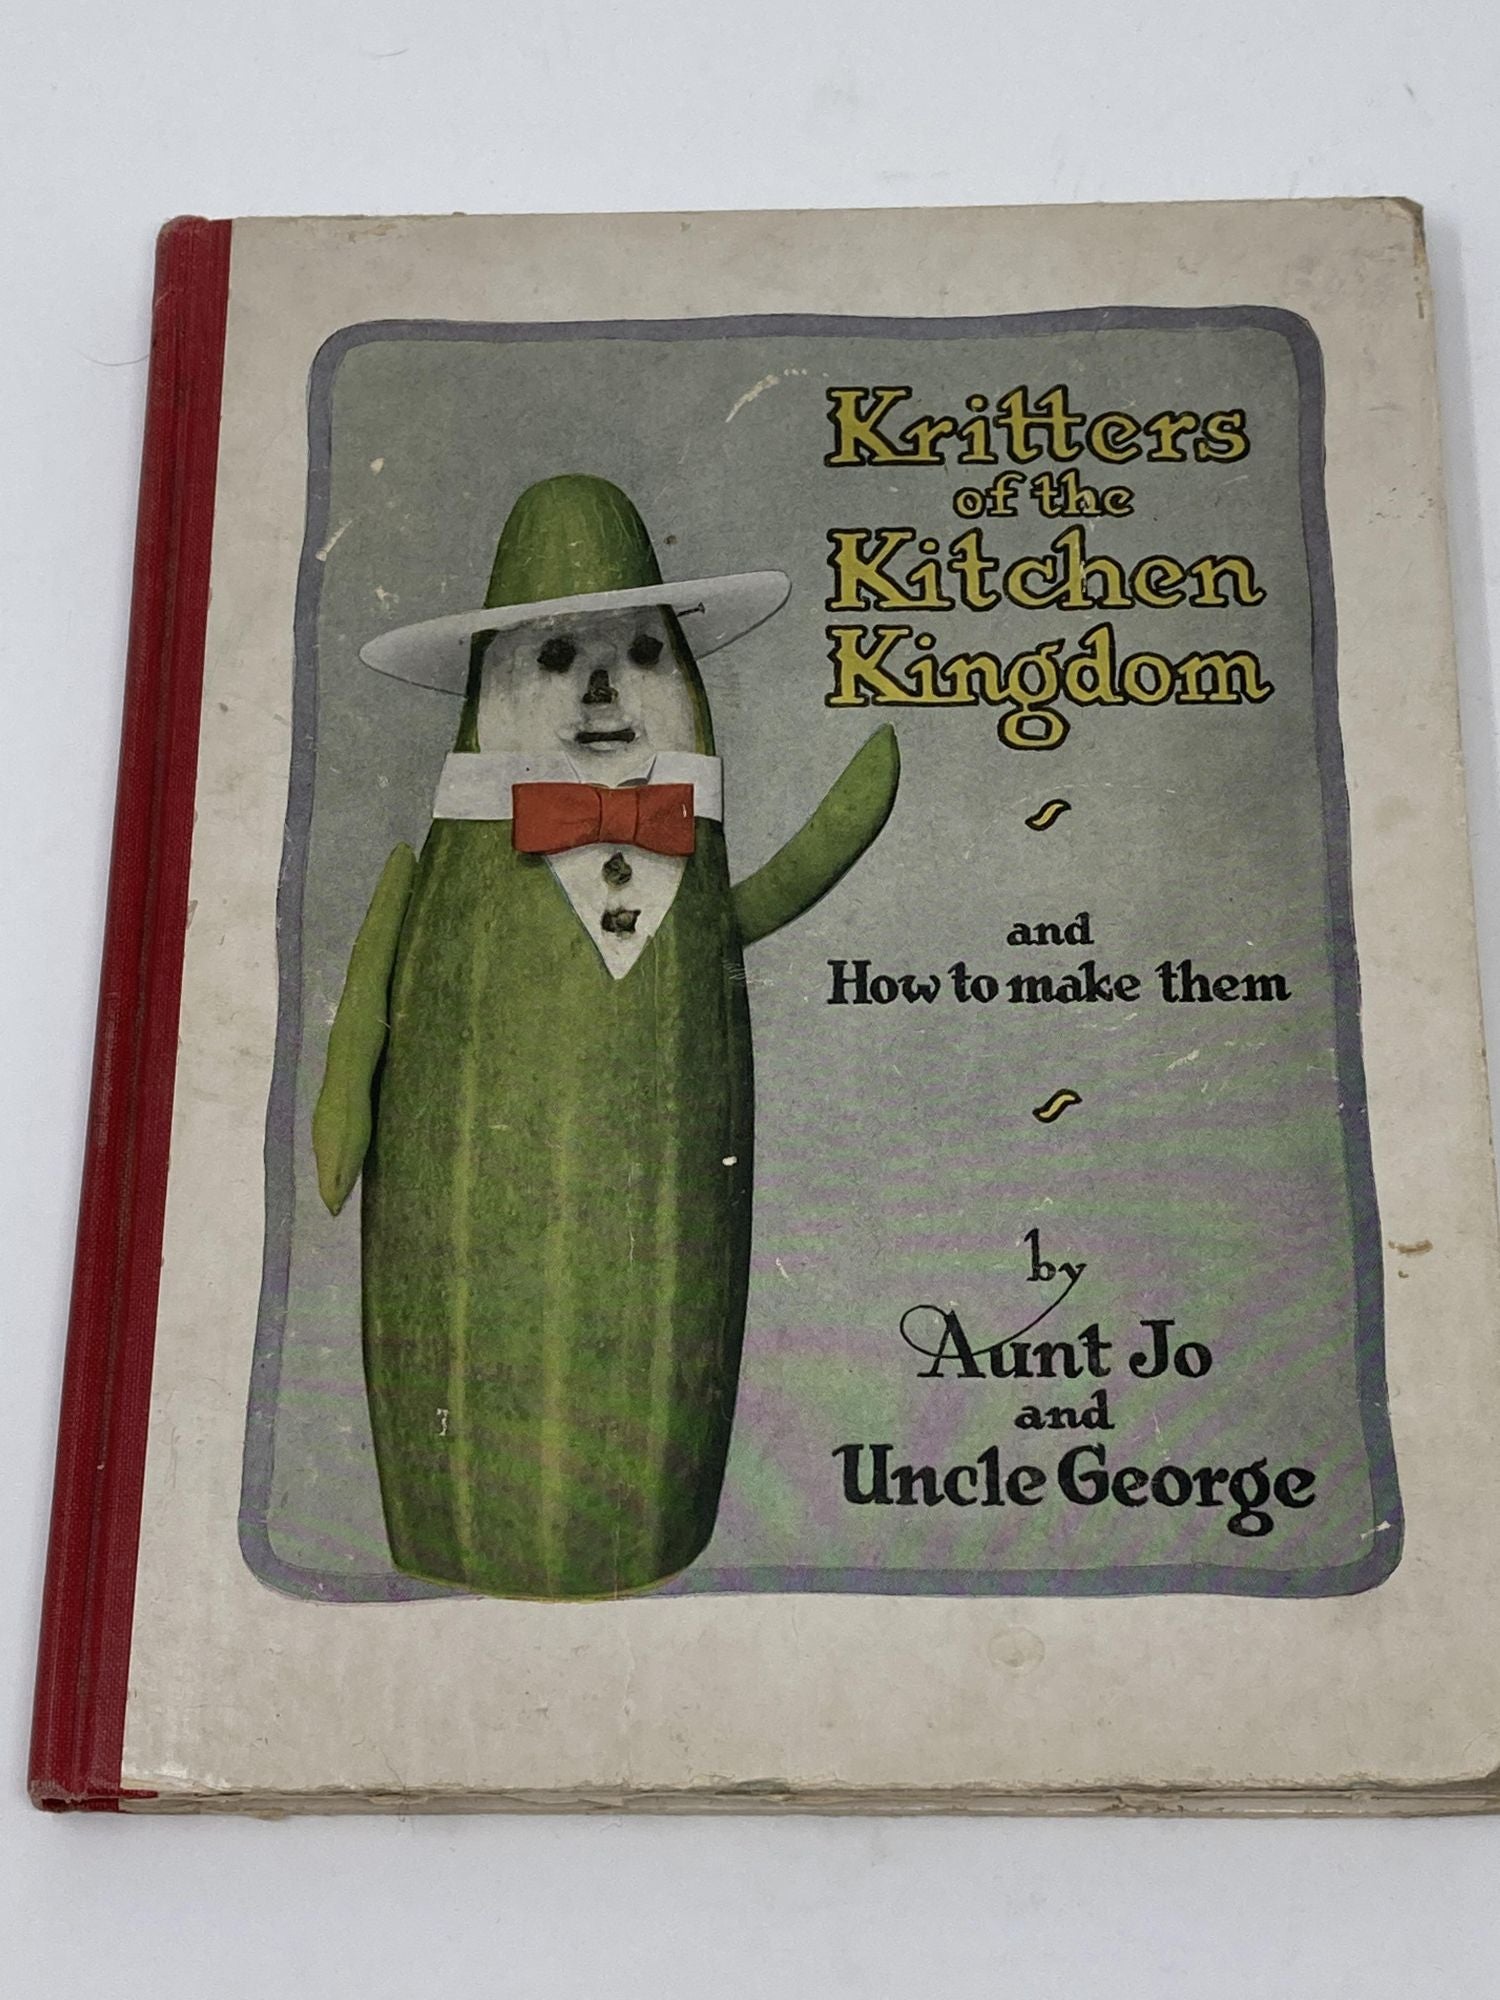 Woods, George Adams (Aunt Jo and Uncle George) - Kritters of the Kitchen Kingdom, and How to Make Them